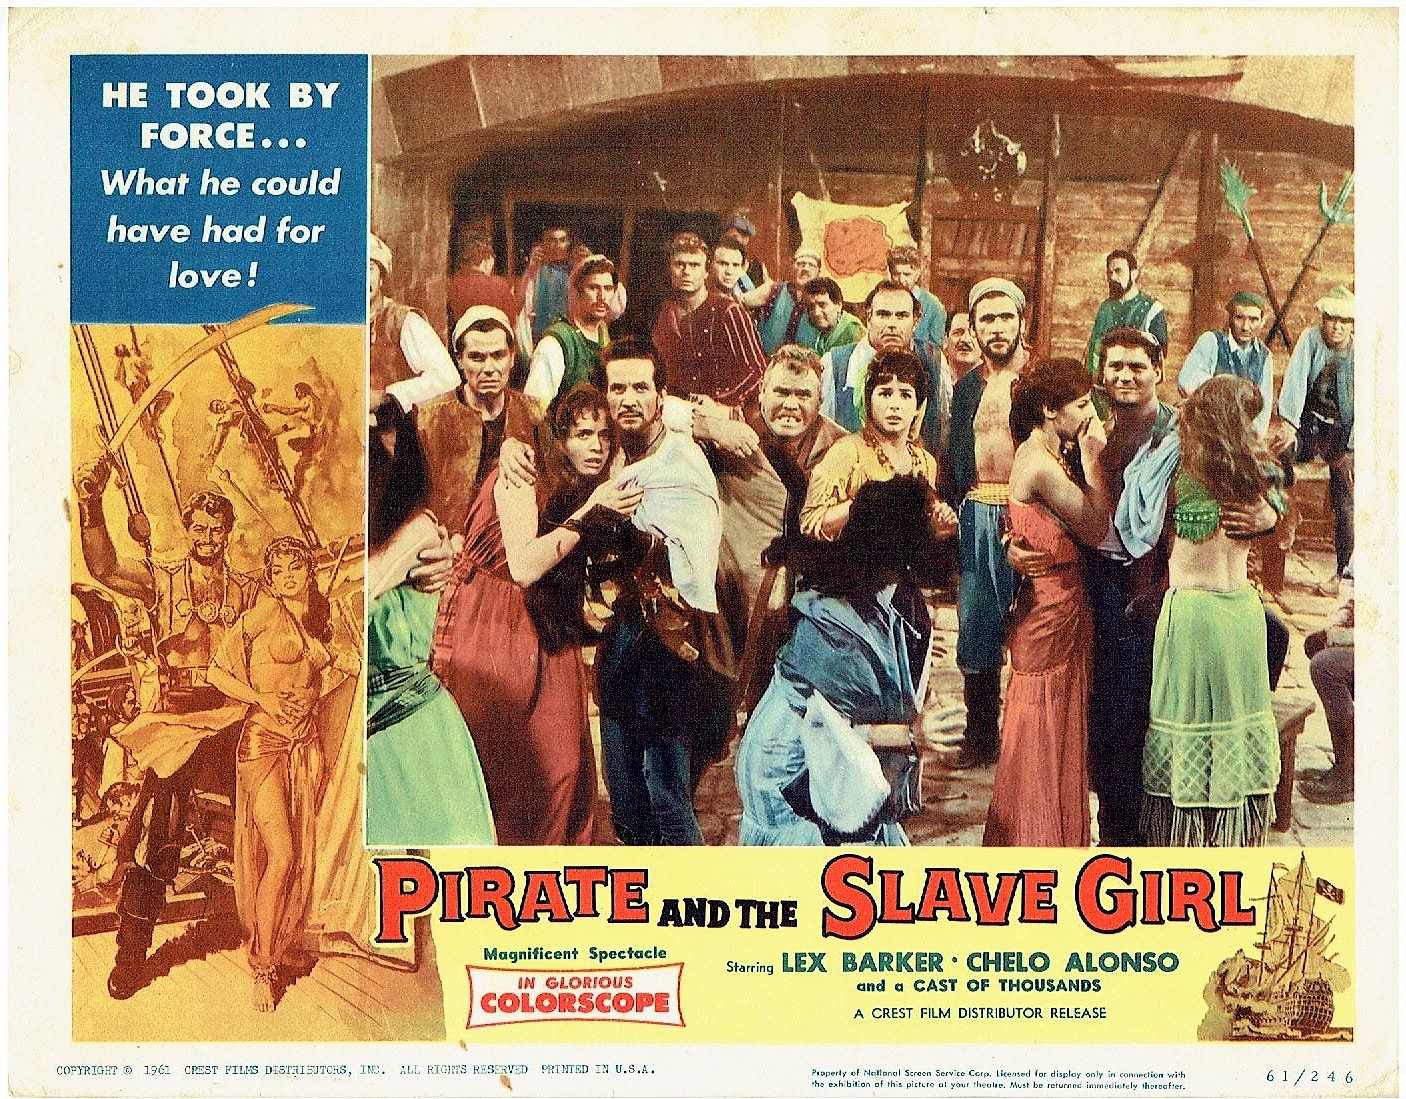 The Pirate and the Slave Girl (1959) Screenshot 4